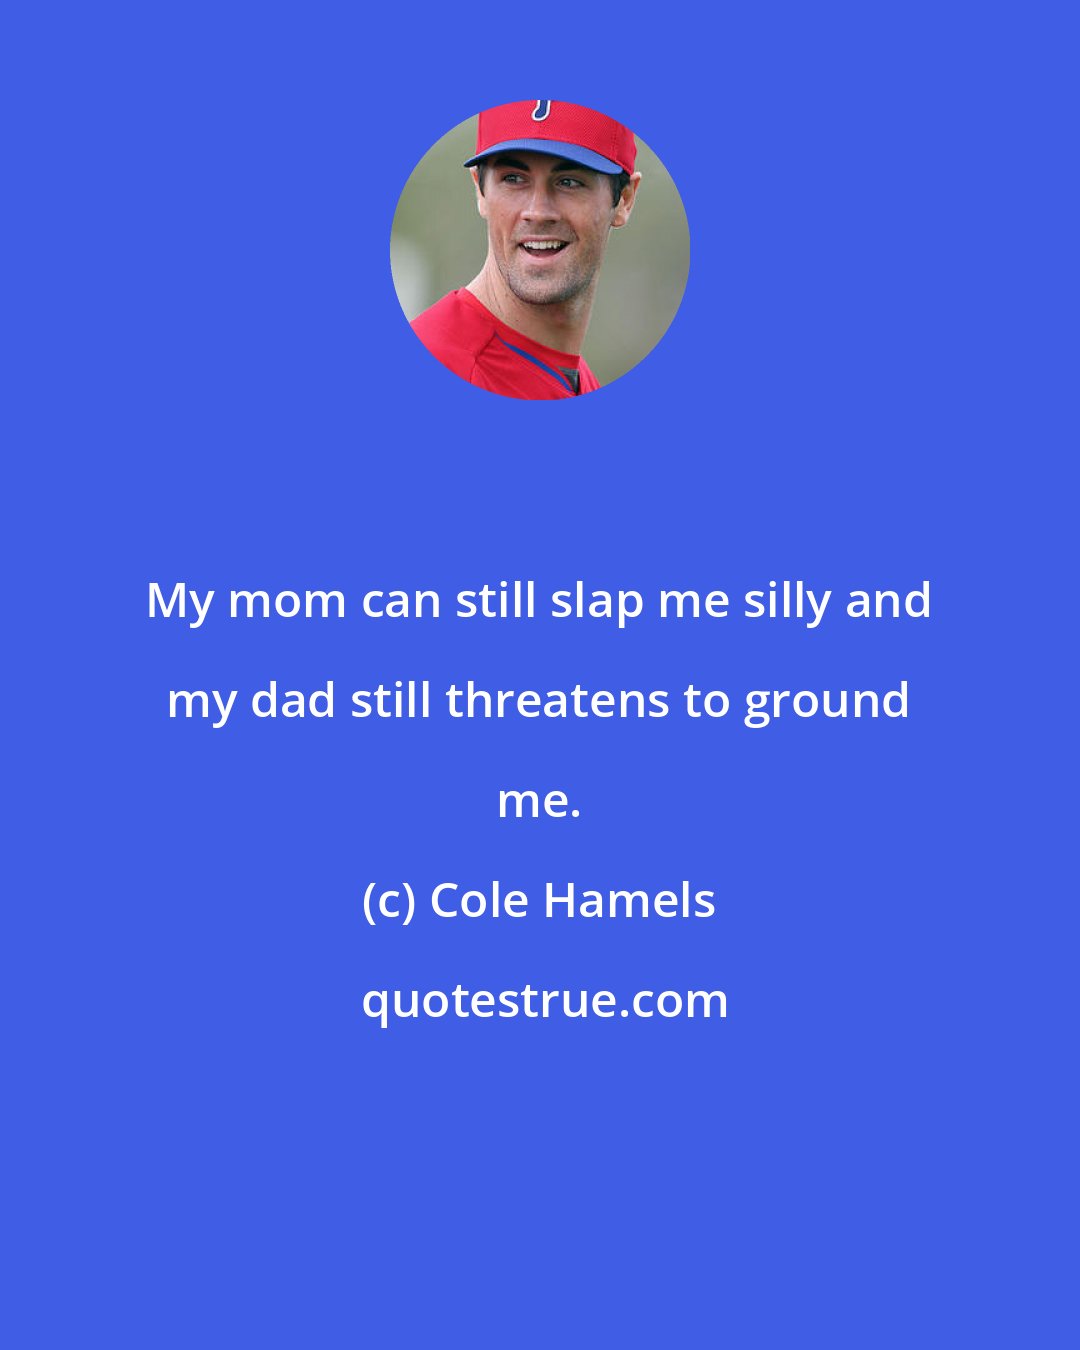 Cole Hamels: My mom can still slap me silly and my dad still threatens to ground me.